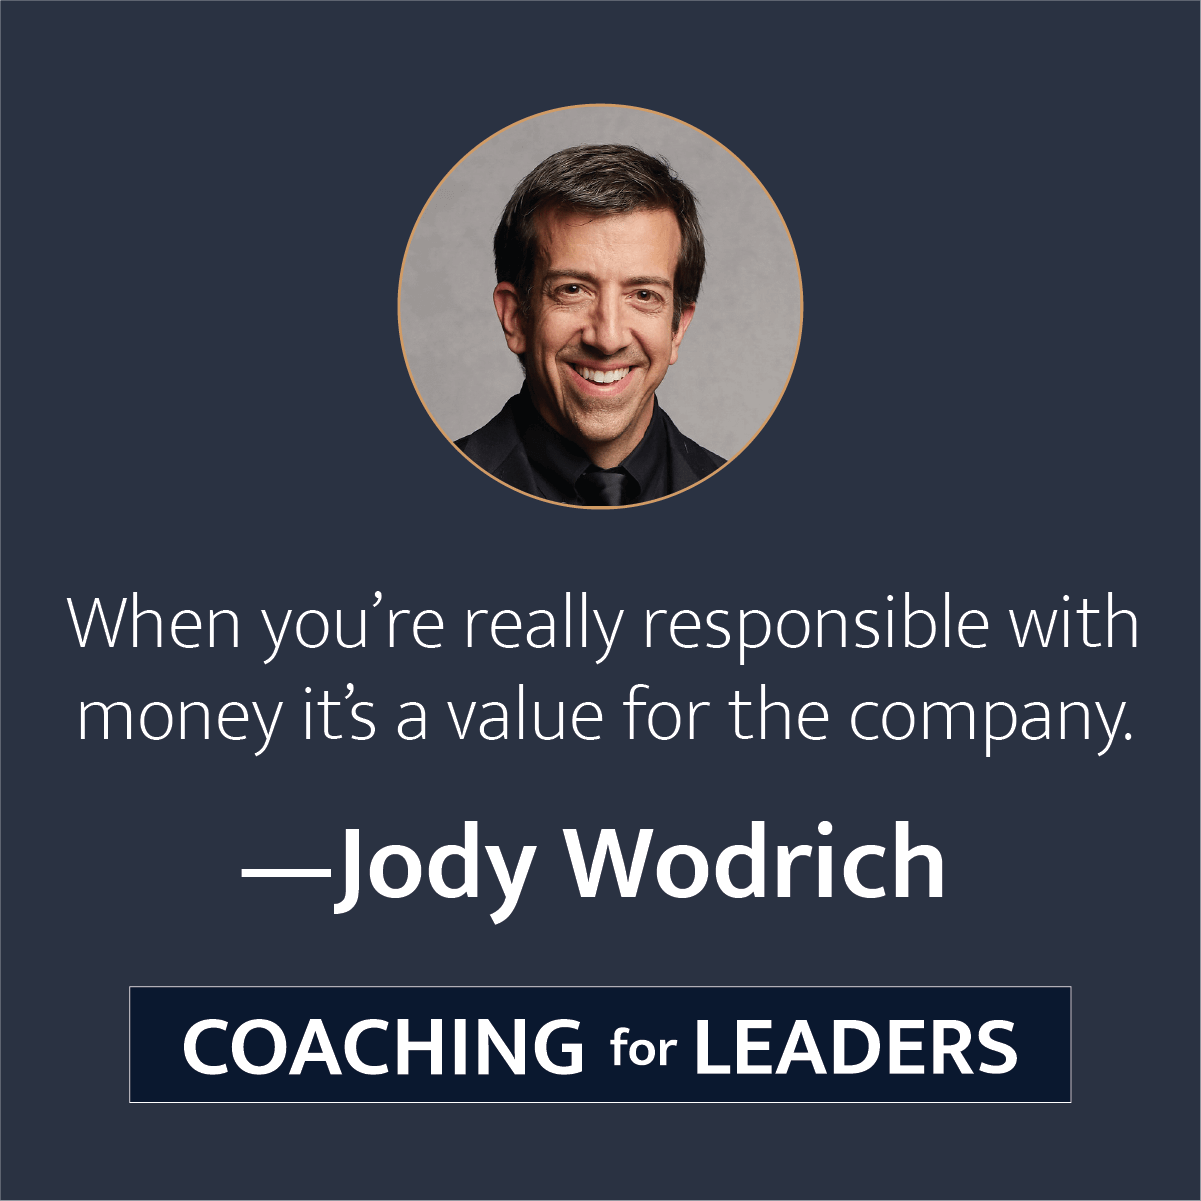 When you're really responsible with money it's a value for the company.